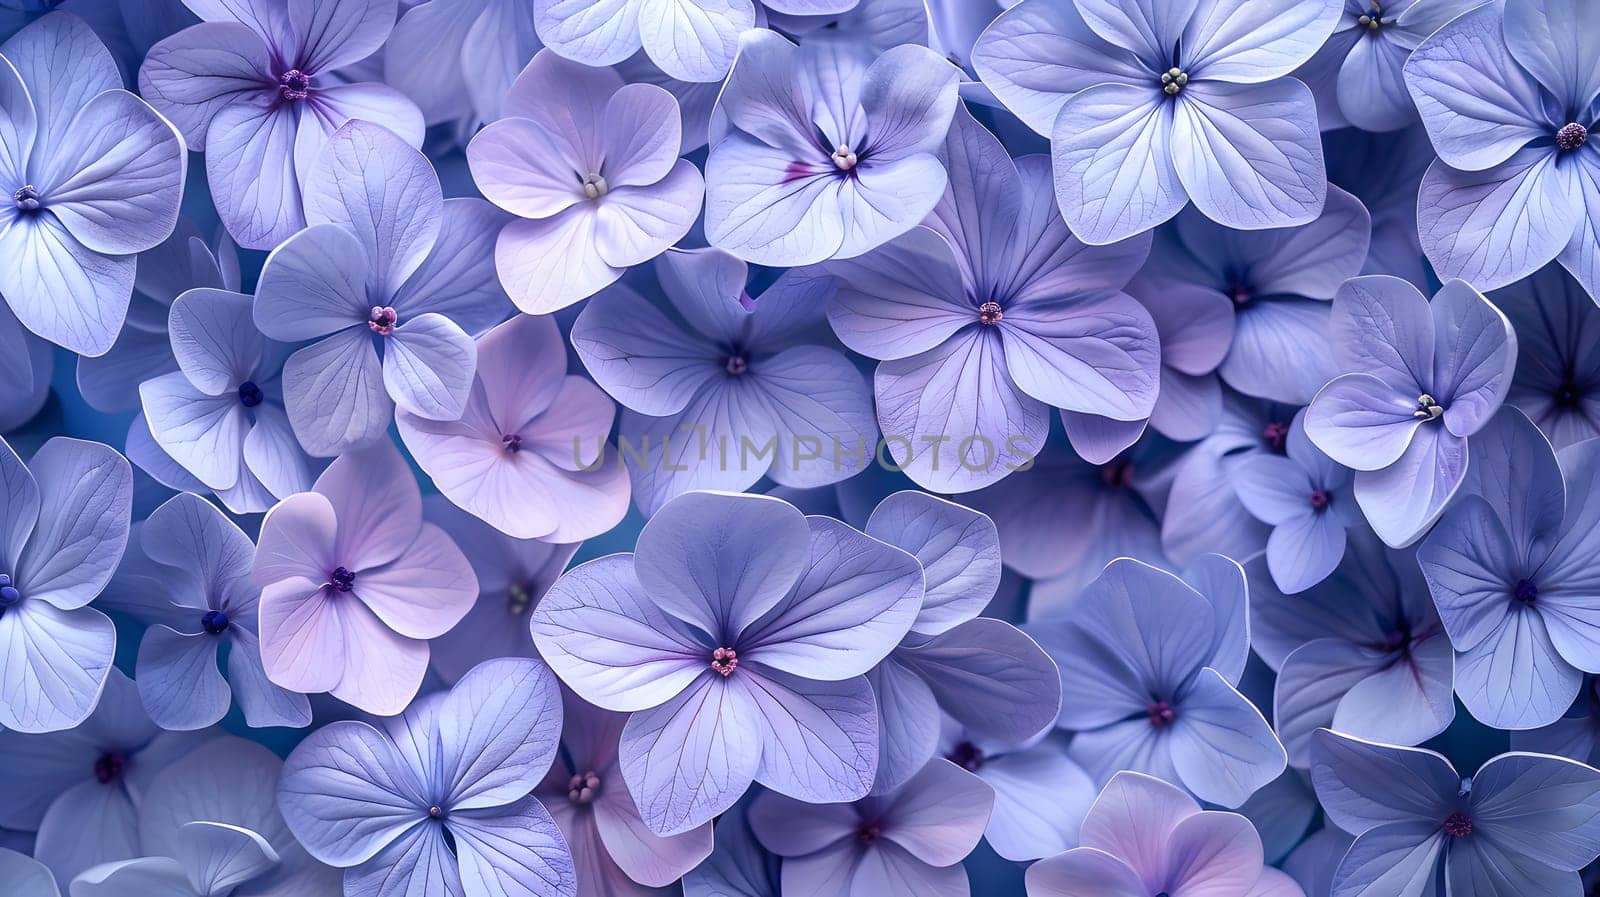 A closeup image of vibrant purple flowers against an azure background. The electric blue petals stand out beautifully on this flowering plant, creating a stunning contrast